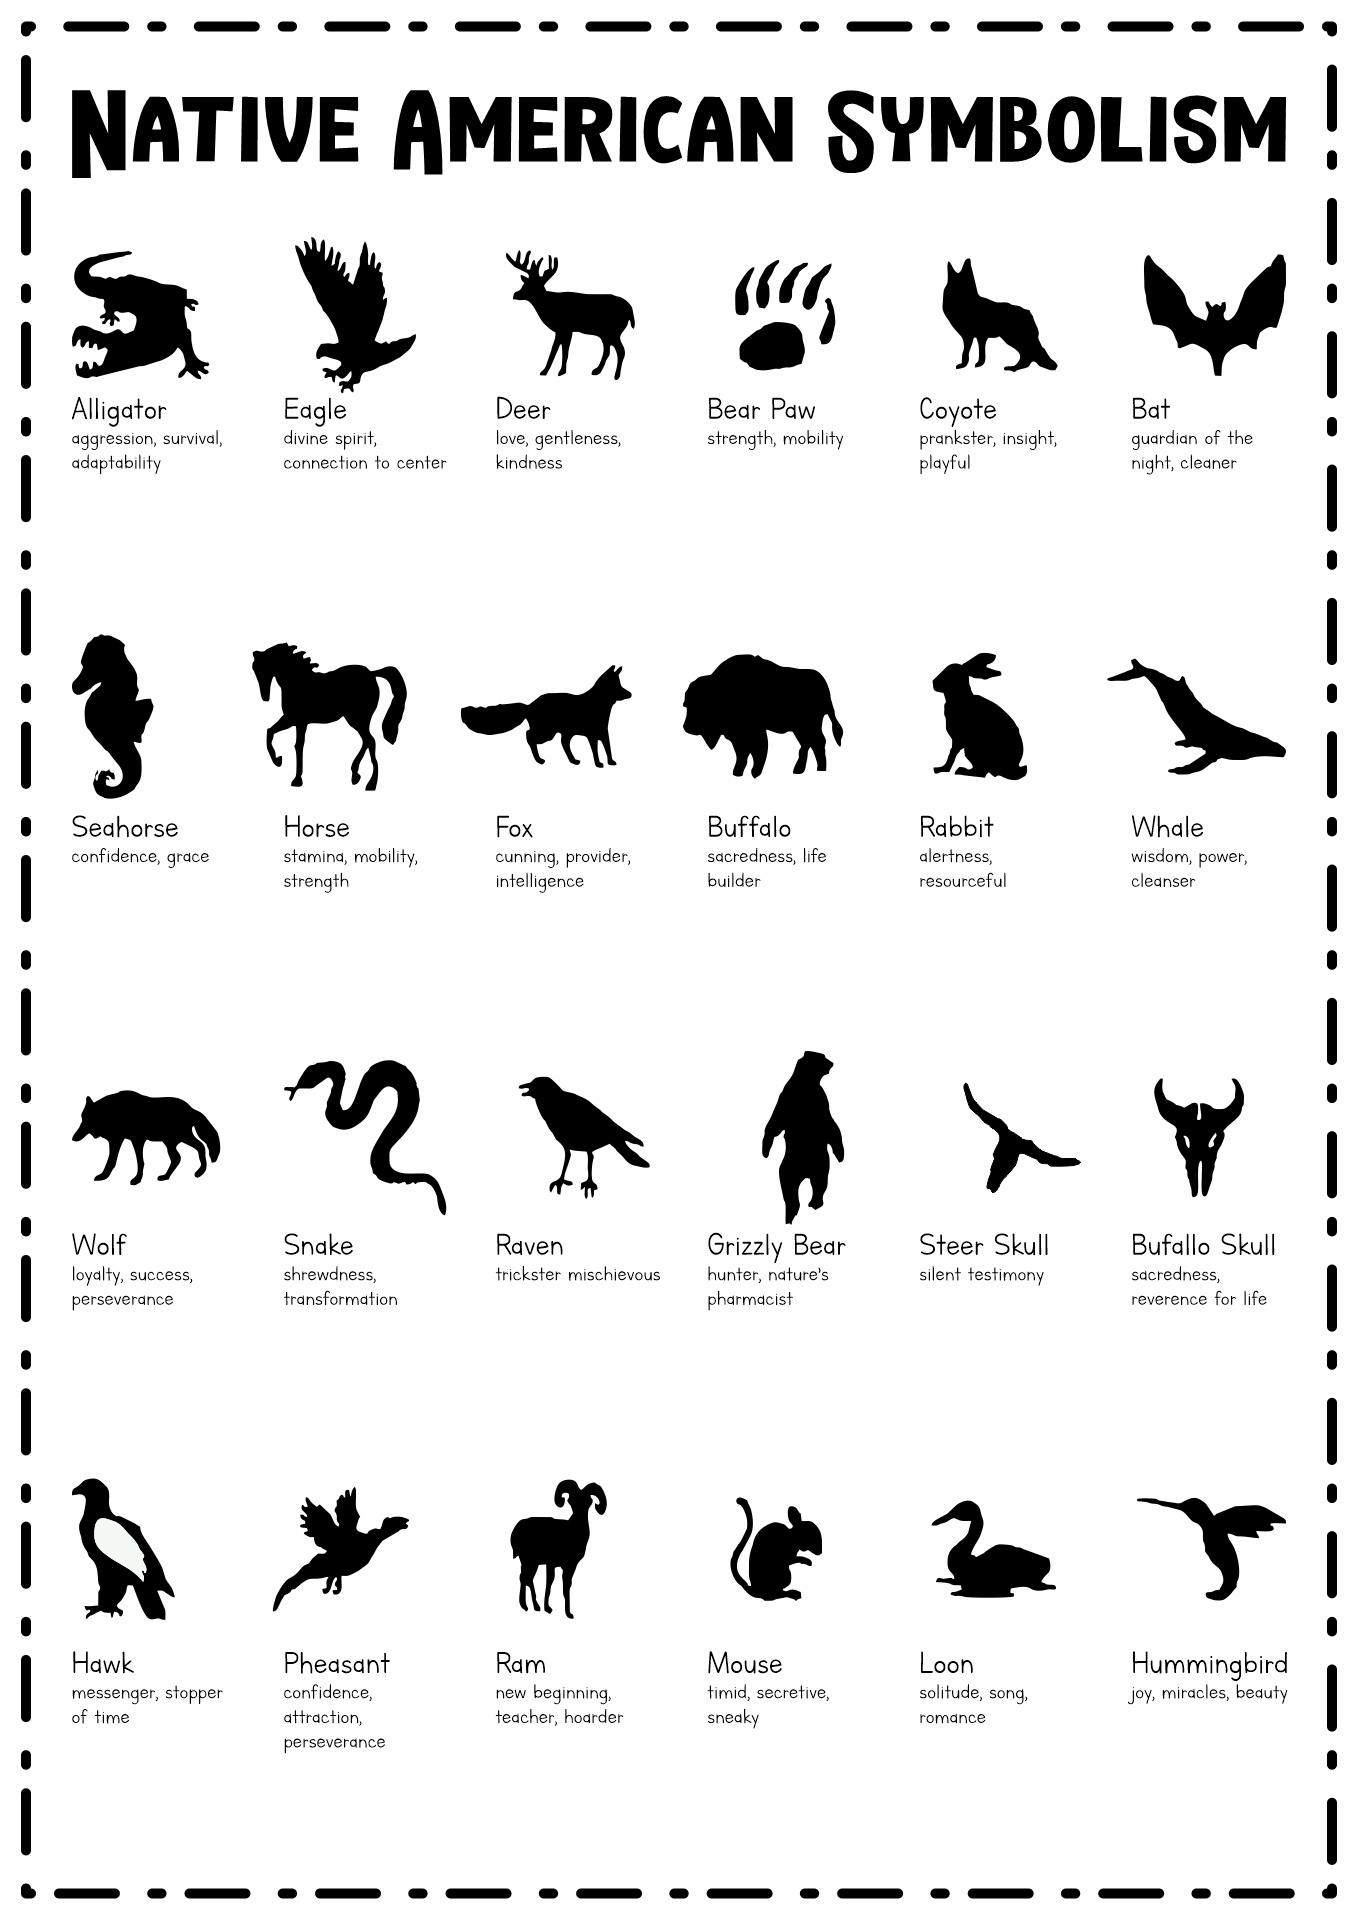 Native American Animals and Meanings Image